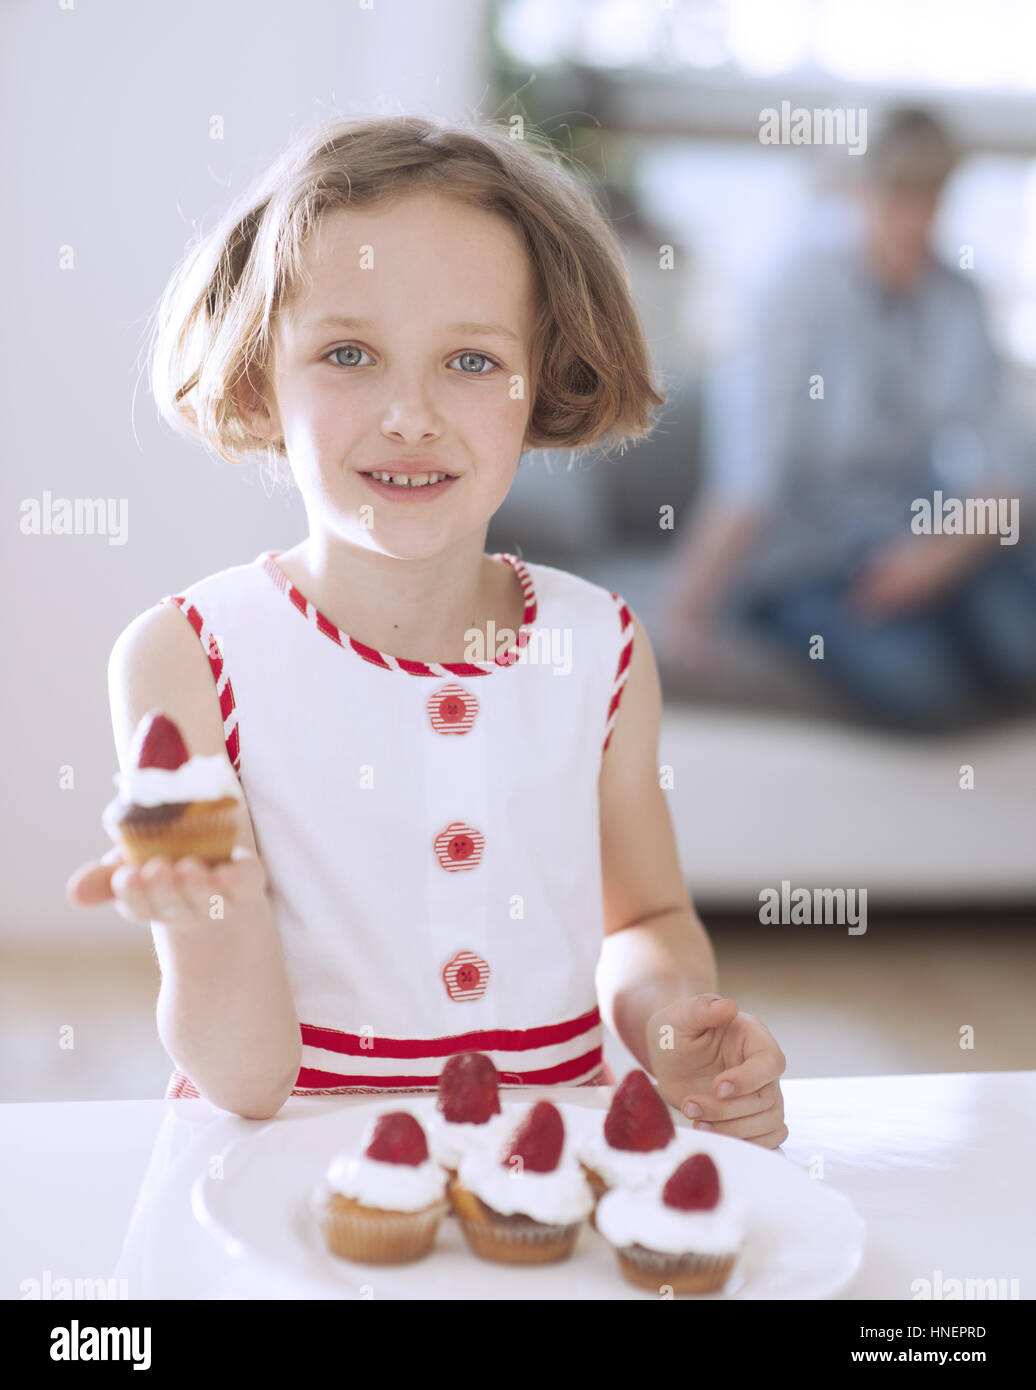 Young Girl holding cup cake Banque D'Images